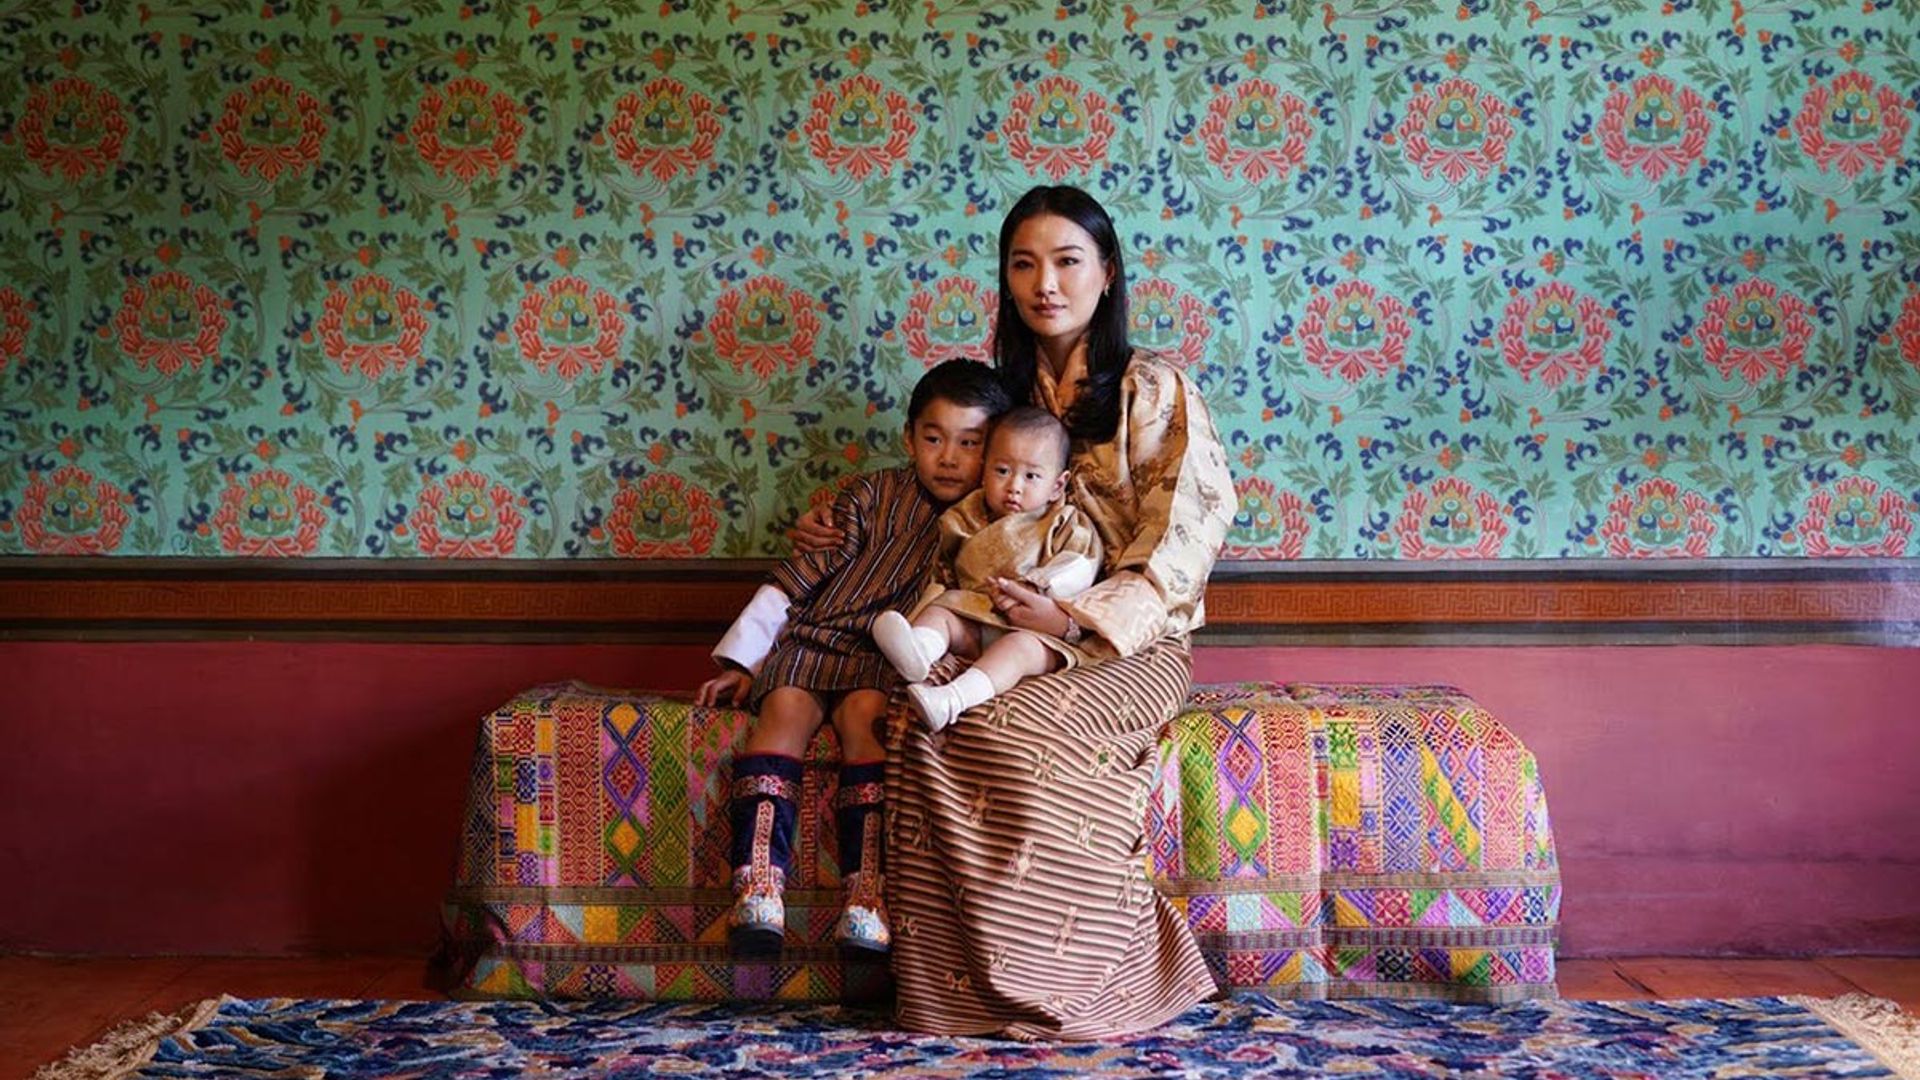 King Jigme Khesar and Queen Jetsun Pema of Bhutan share adorable family photos with royal baby